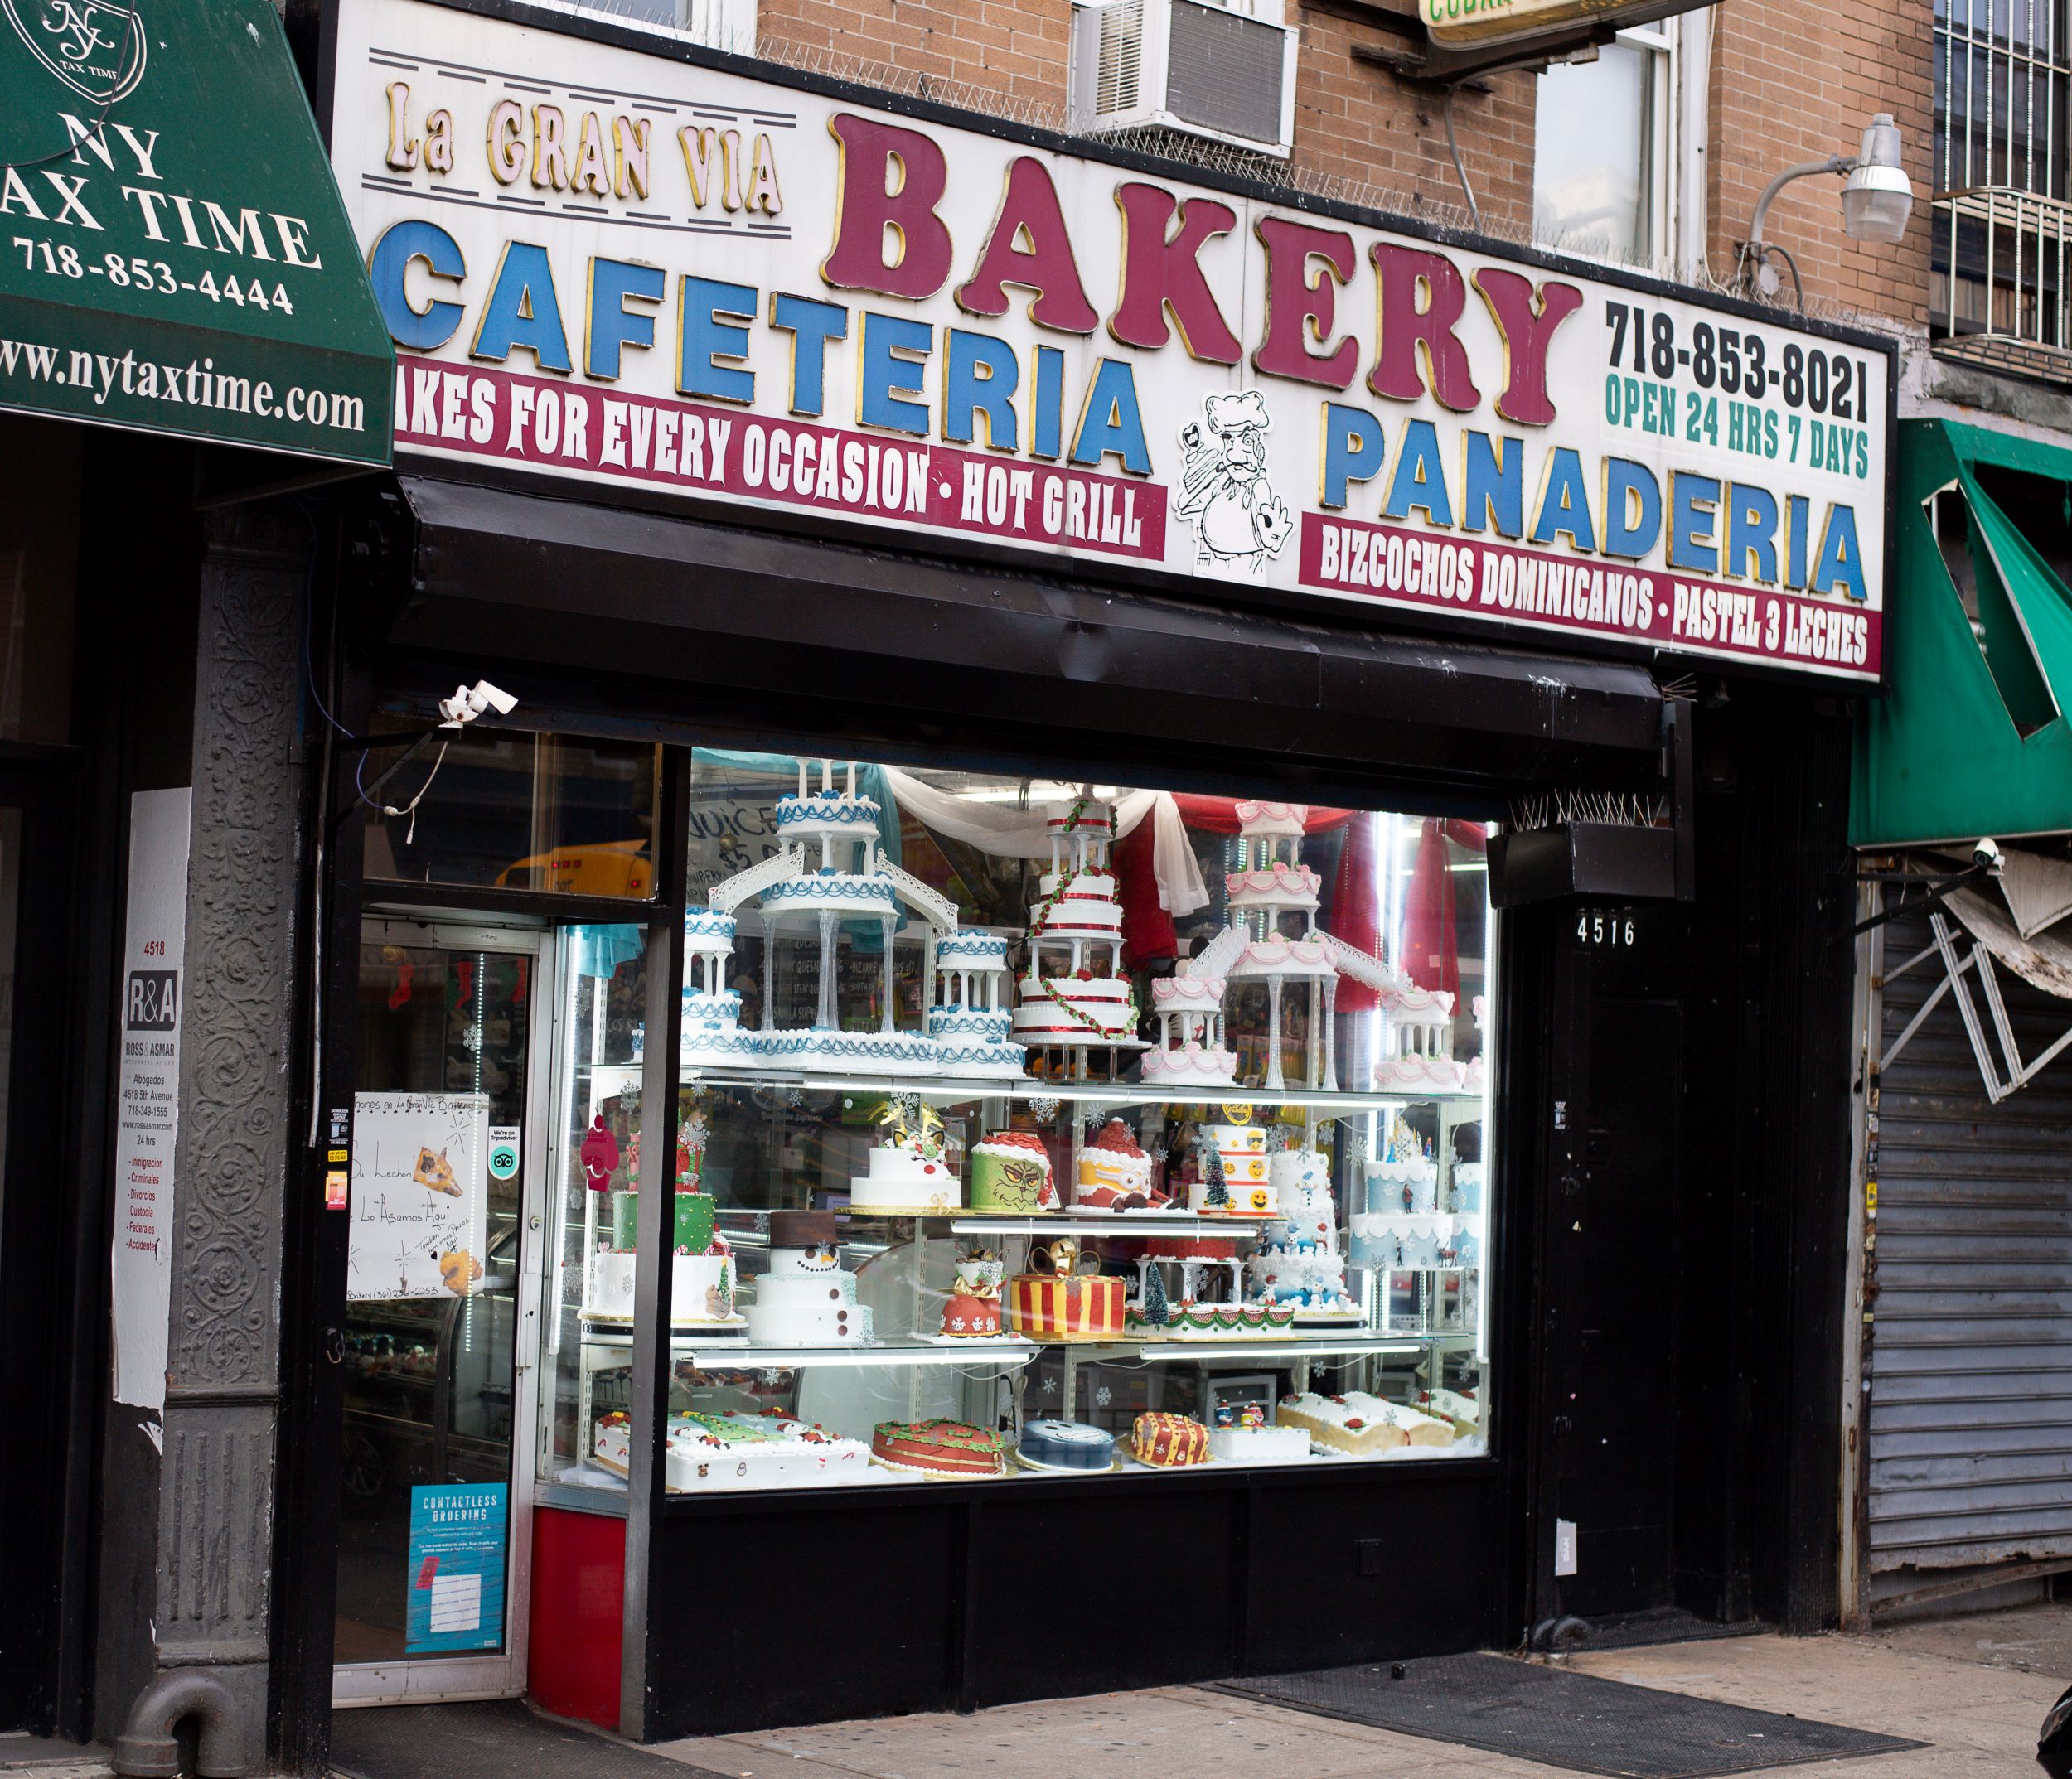 A bakery storefront with a large glass window displaying elaborate cakes. above the window, signs advertise various services in english and spanish, including a cafeteria and bakery items.